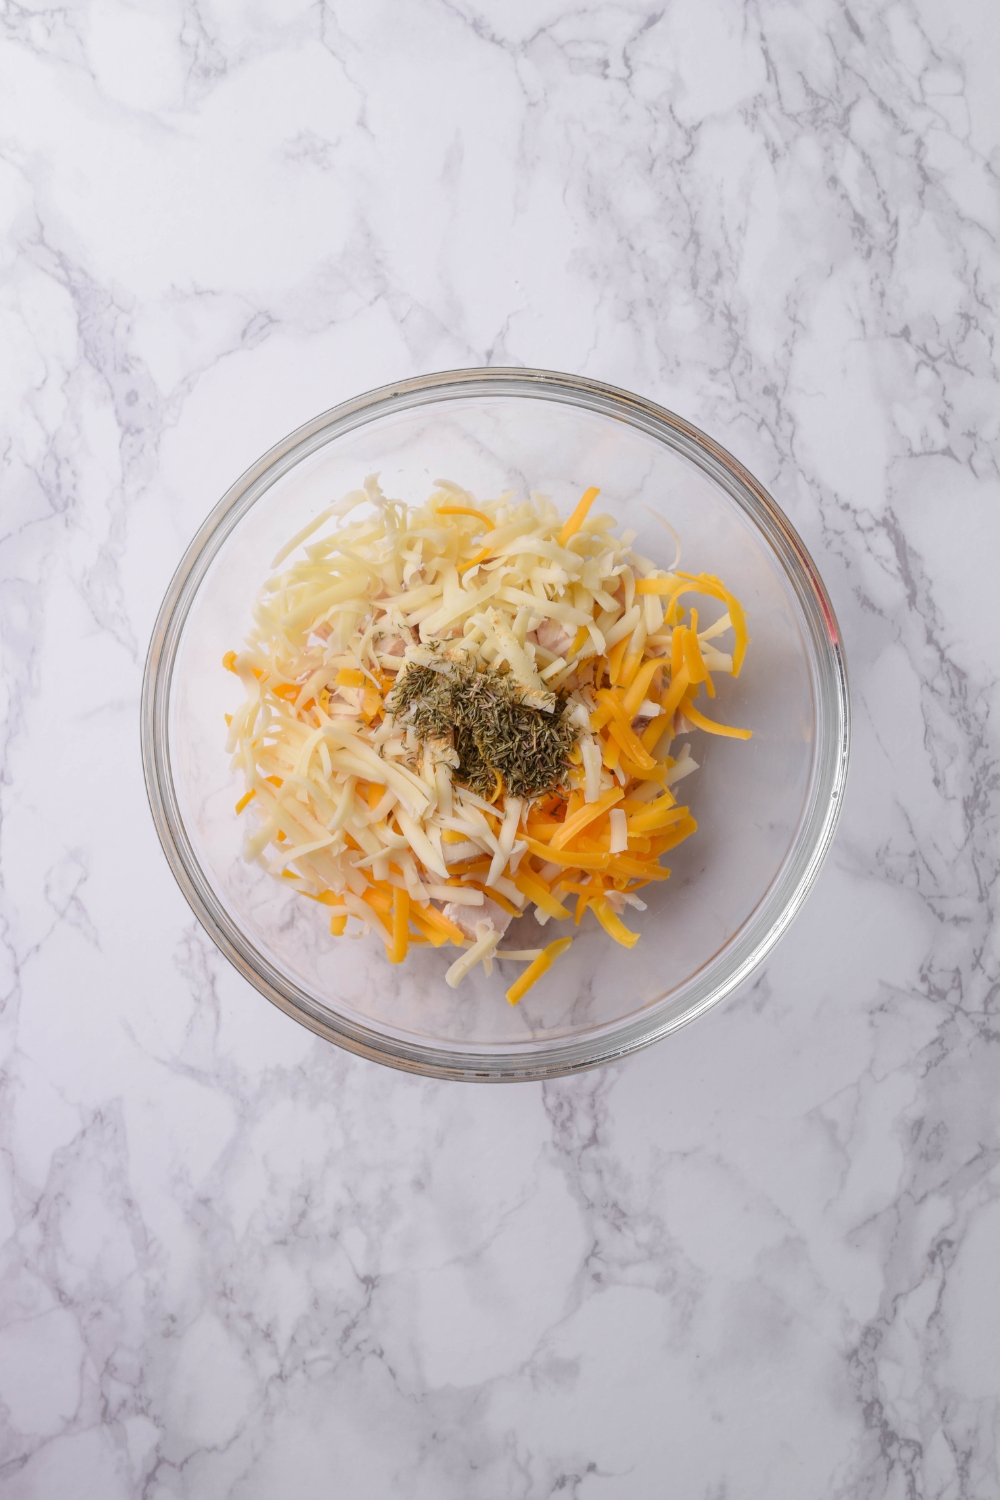 A clear bowl filled with shredded cheese and seasonings.